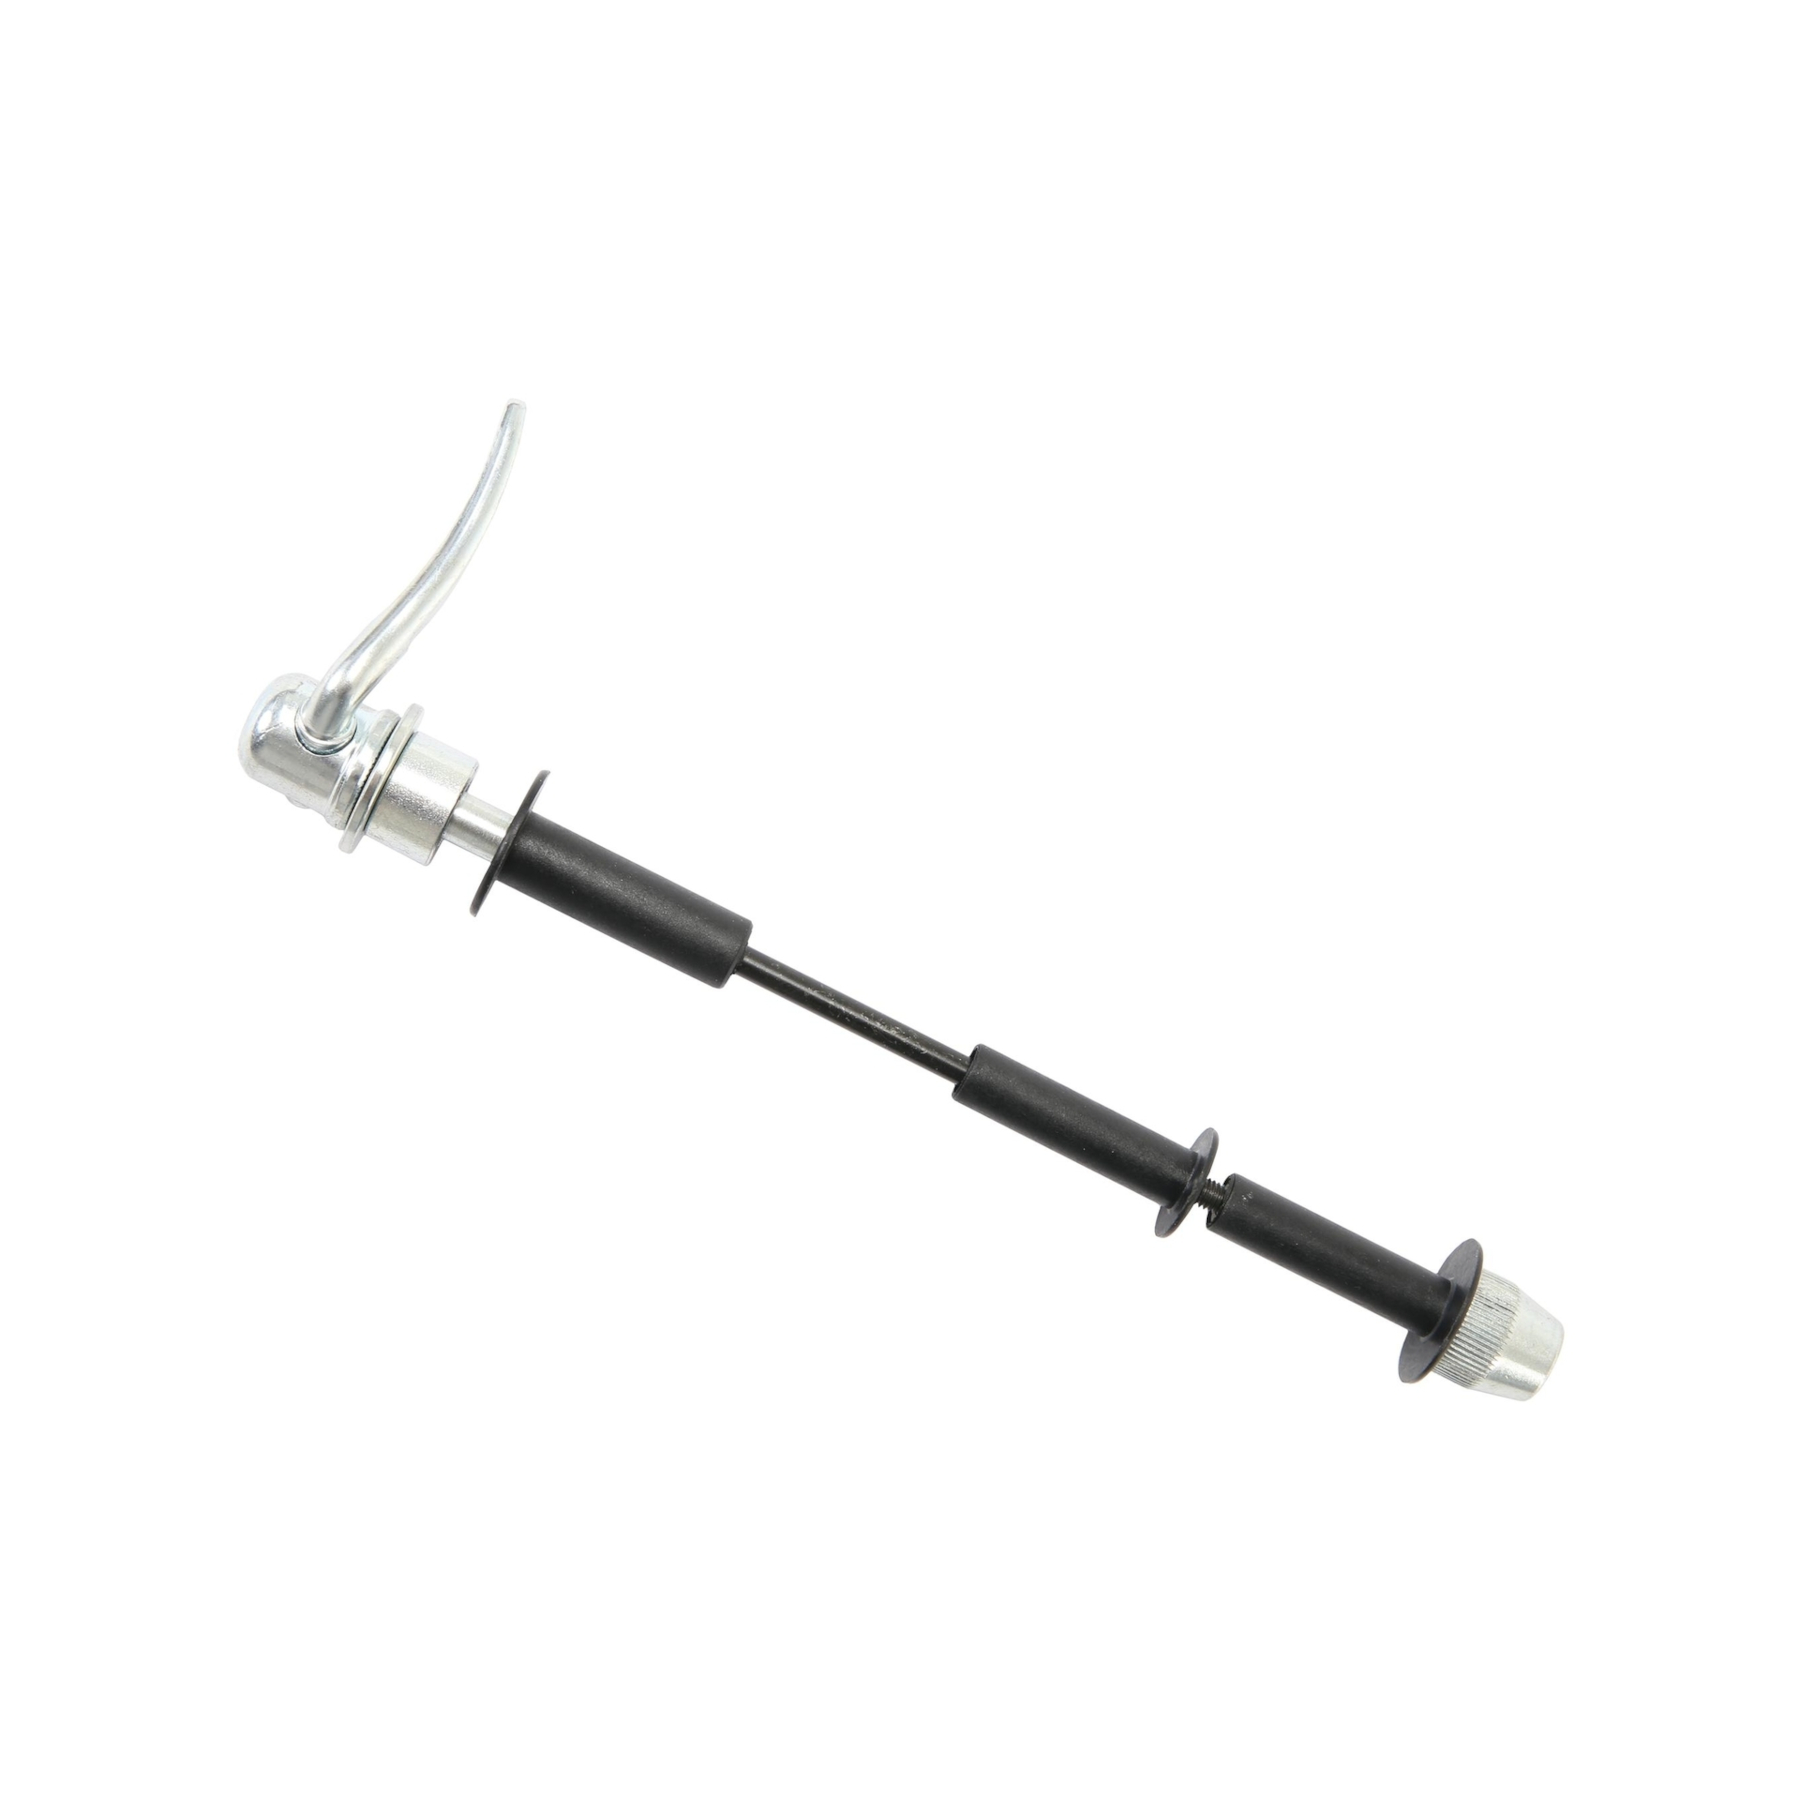 Picture of Elite Thru Axle Adapter  1020008 - 130-148mm - 1020008